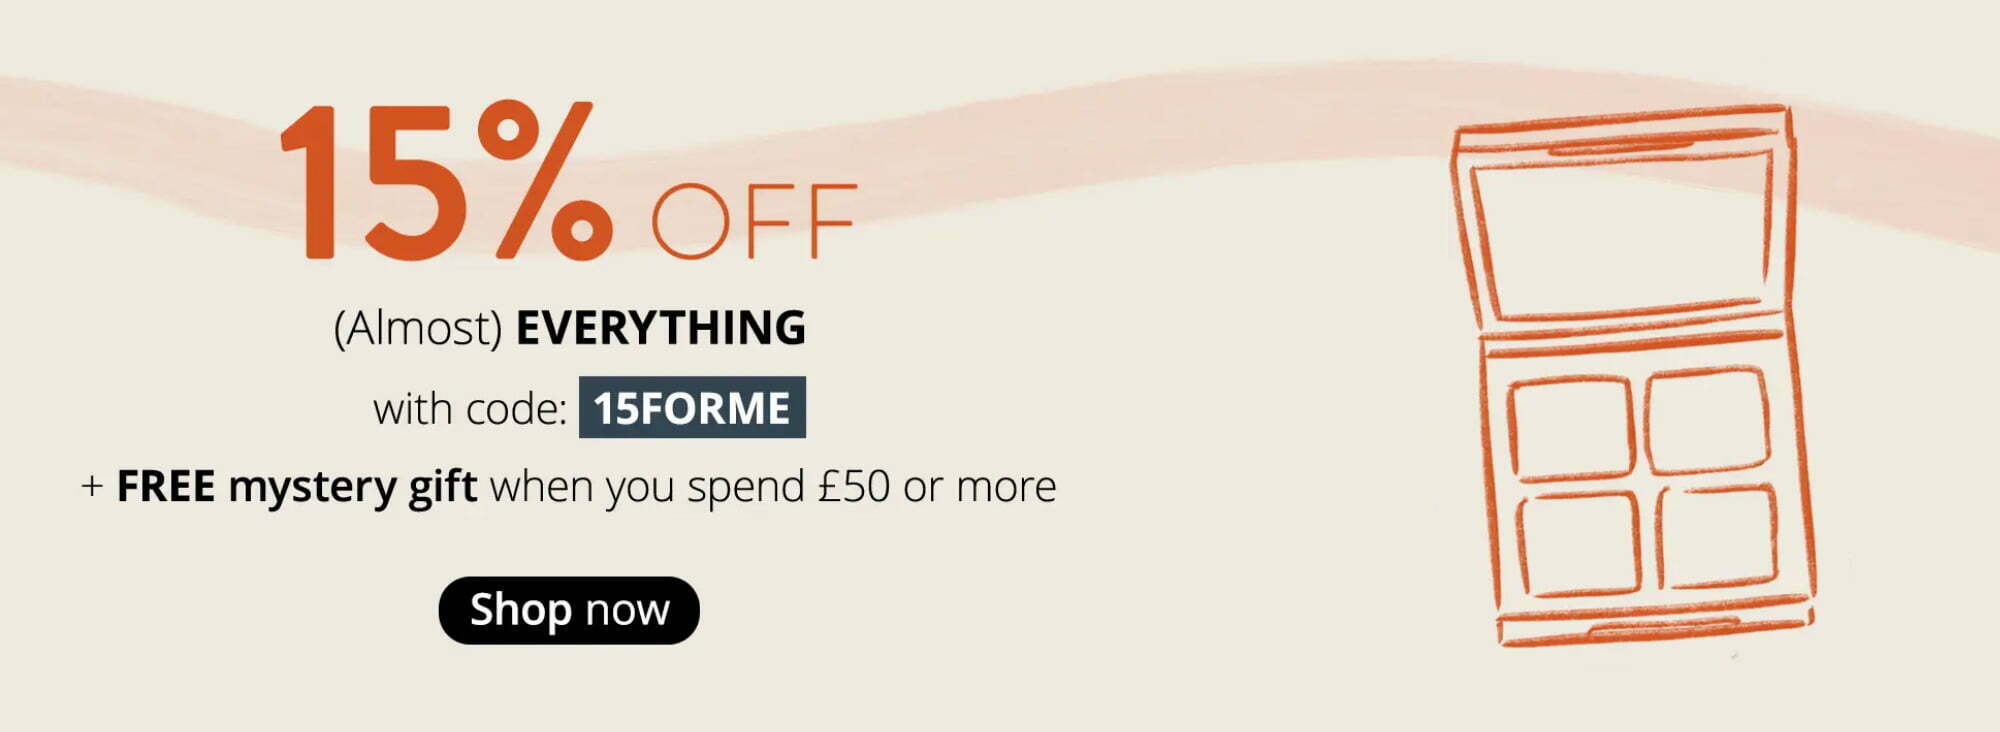 15% off + Mystery Gift when you spend £50